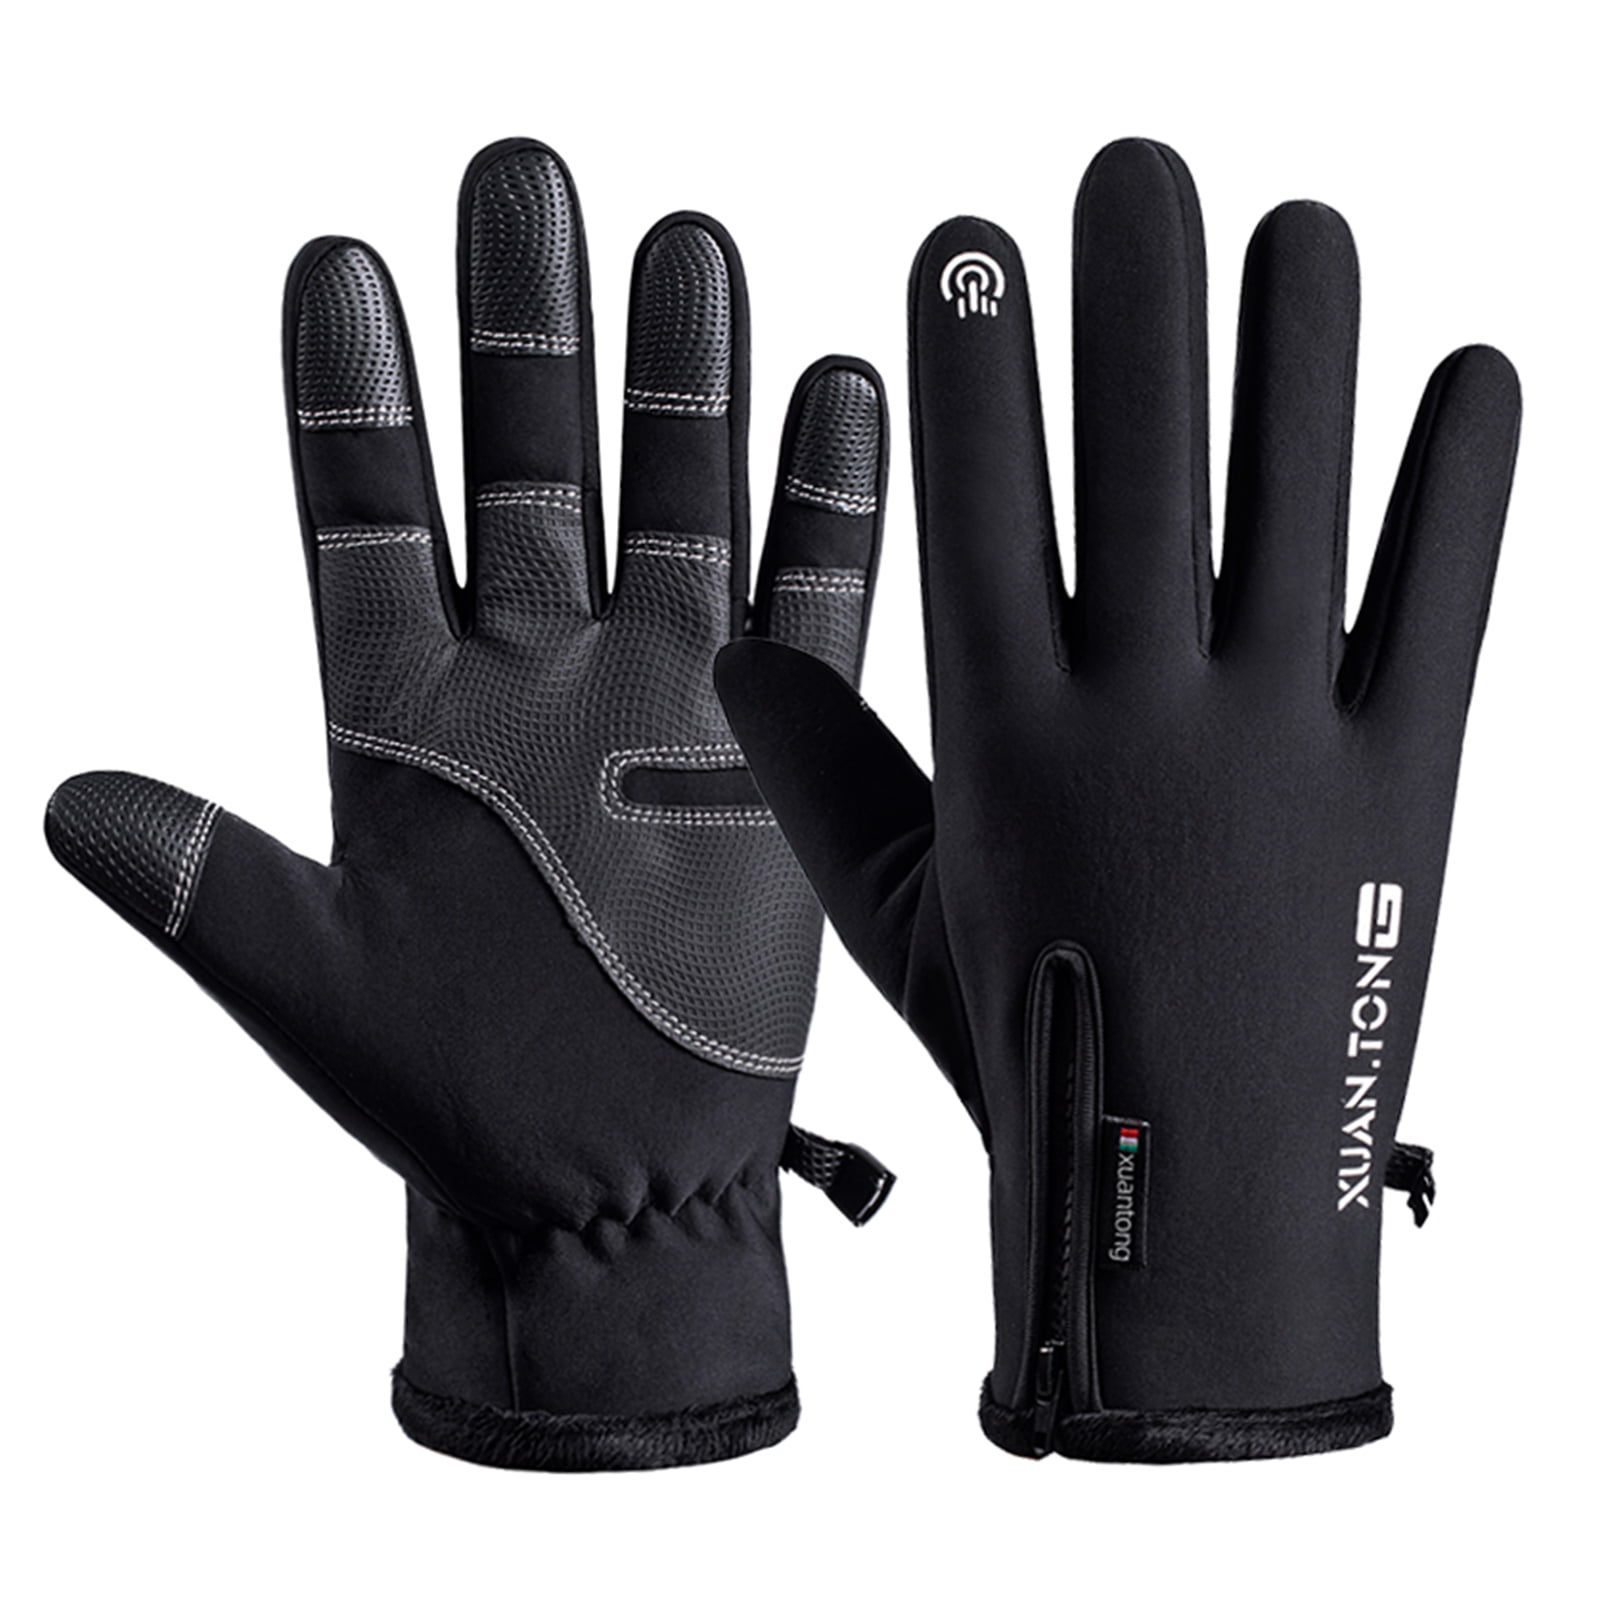 Winter Touchscreen Gloves Thermal Windproof Warm Men Women for Cycling Driving